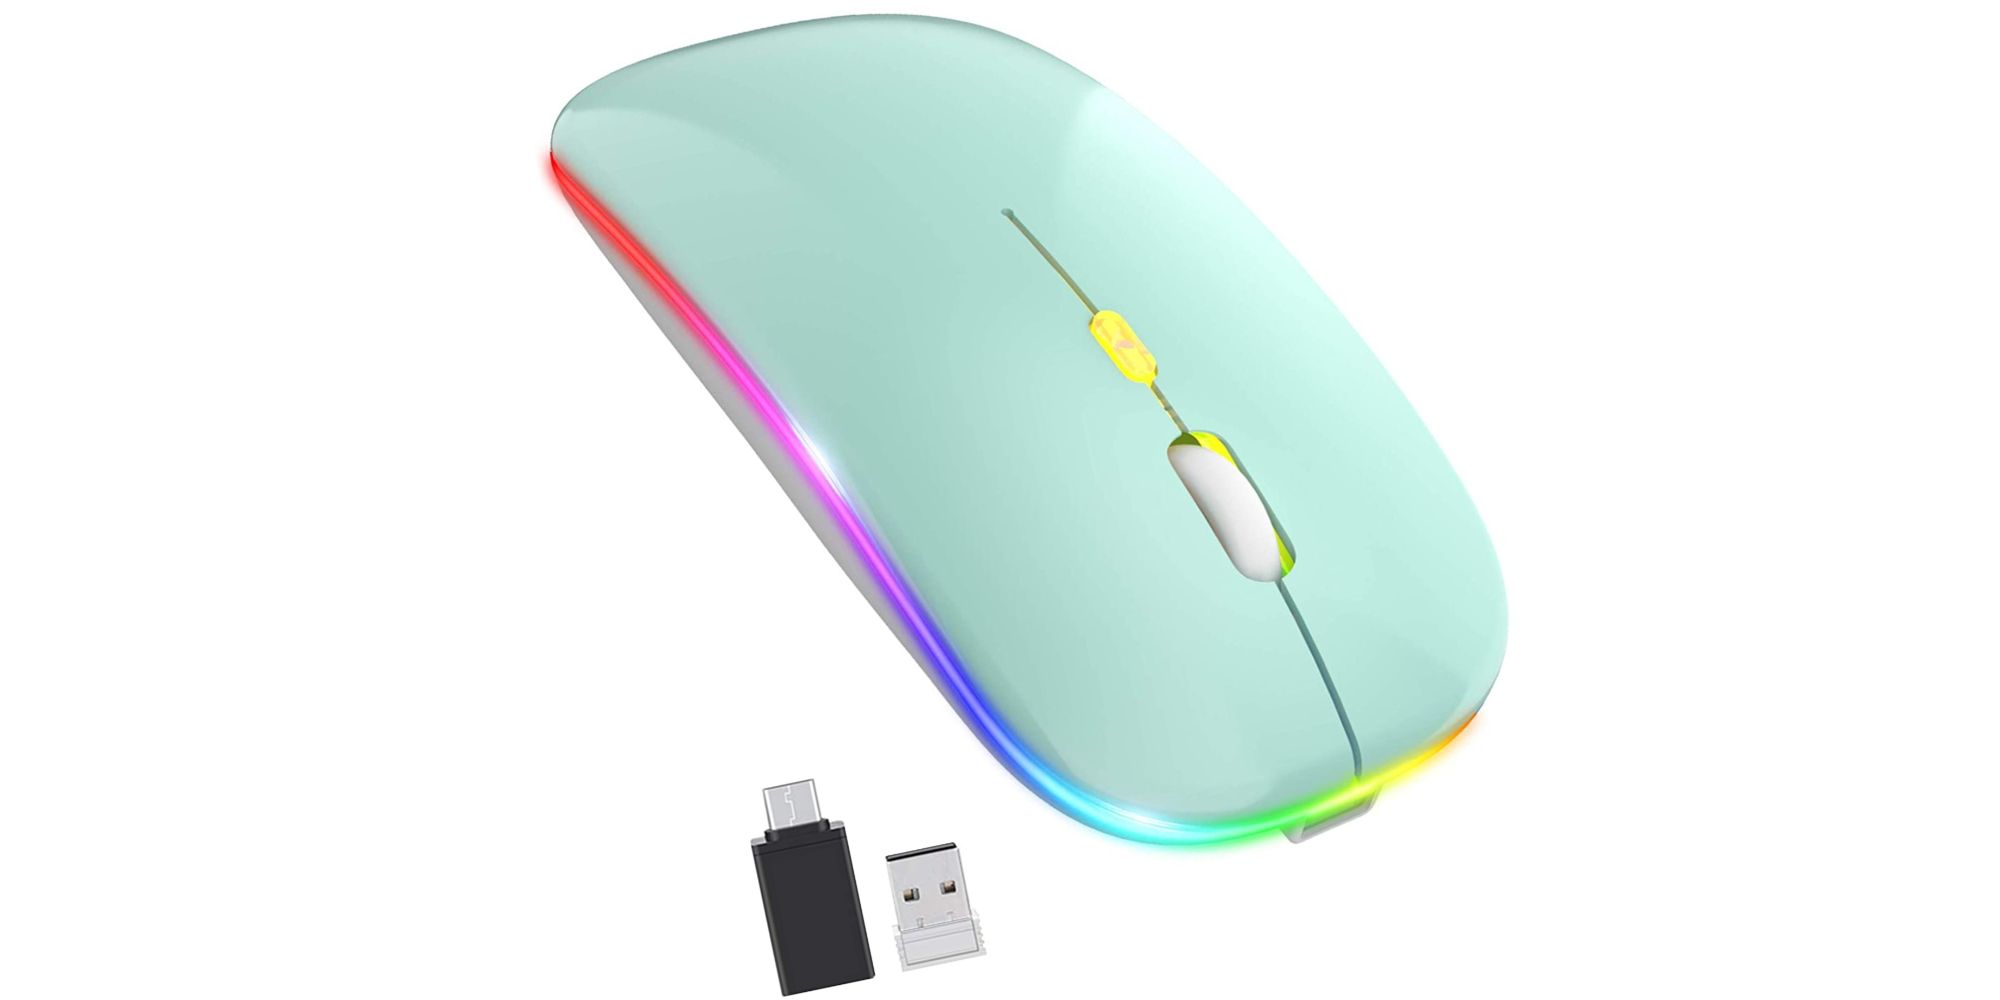 LED wireless and rechargeable mouse from Amazon